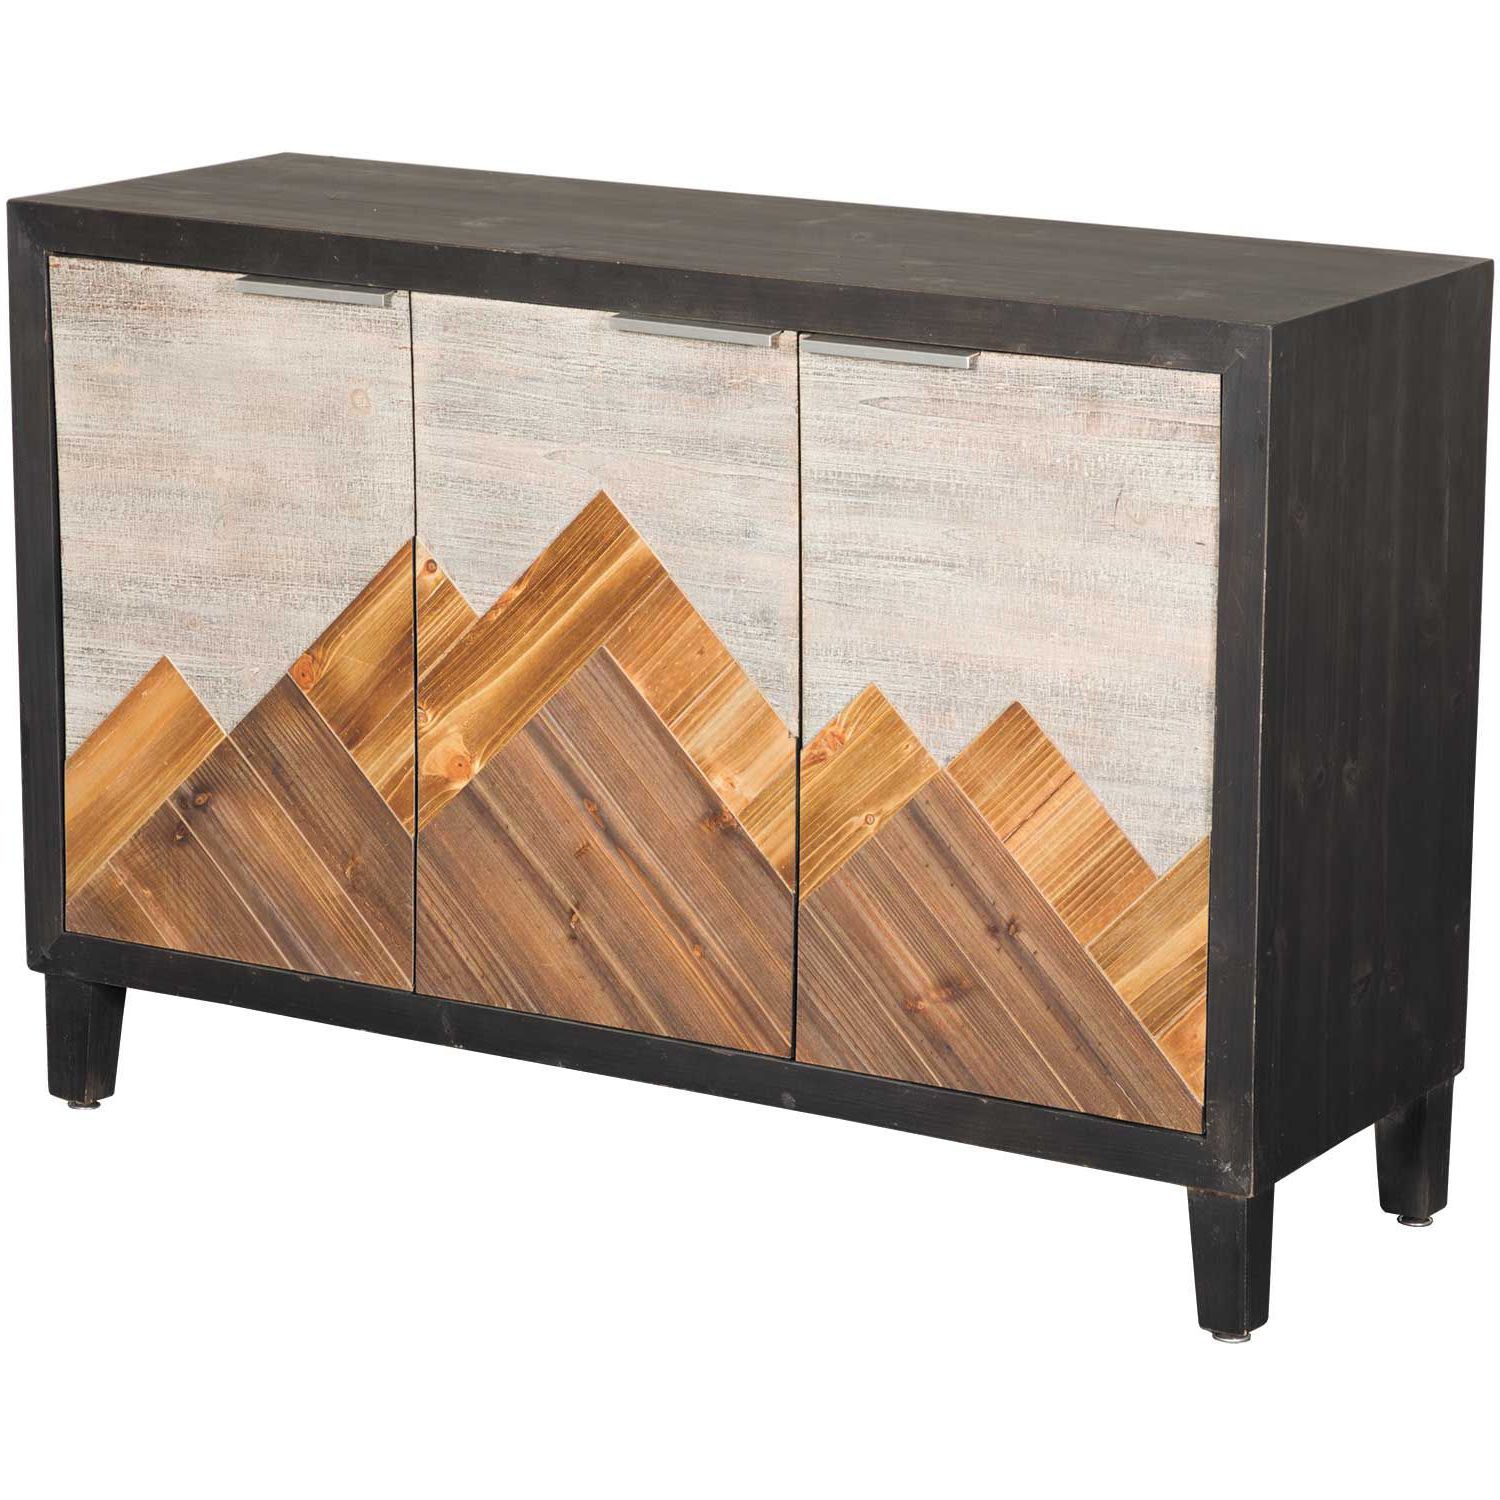 Mountain 3 Door Accent Cabinet | Home Accents | Afw Intended For 3 Door Accent Cabinet Sideboards (Gallery 5 of 20)